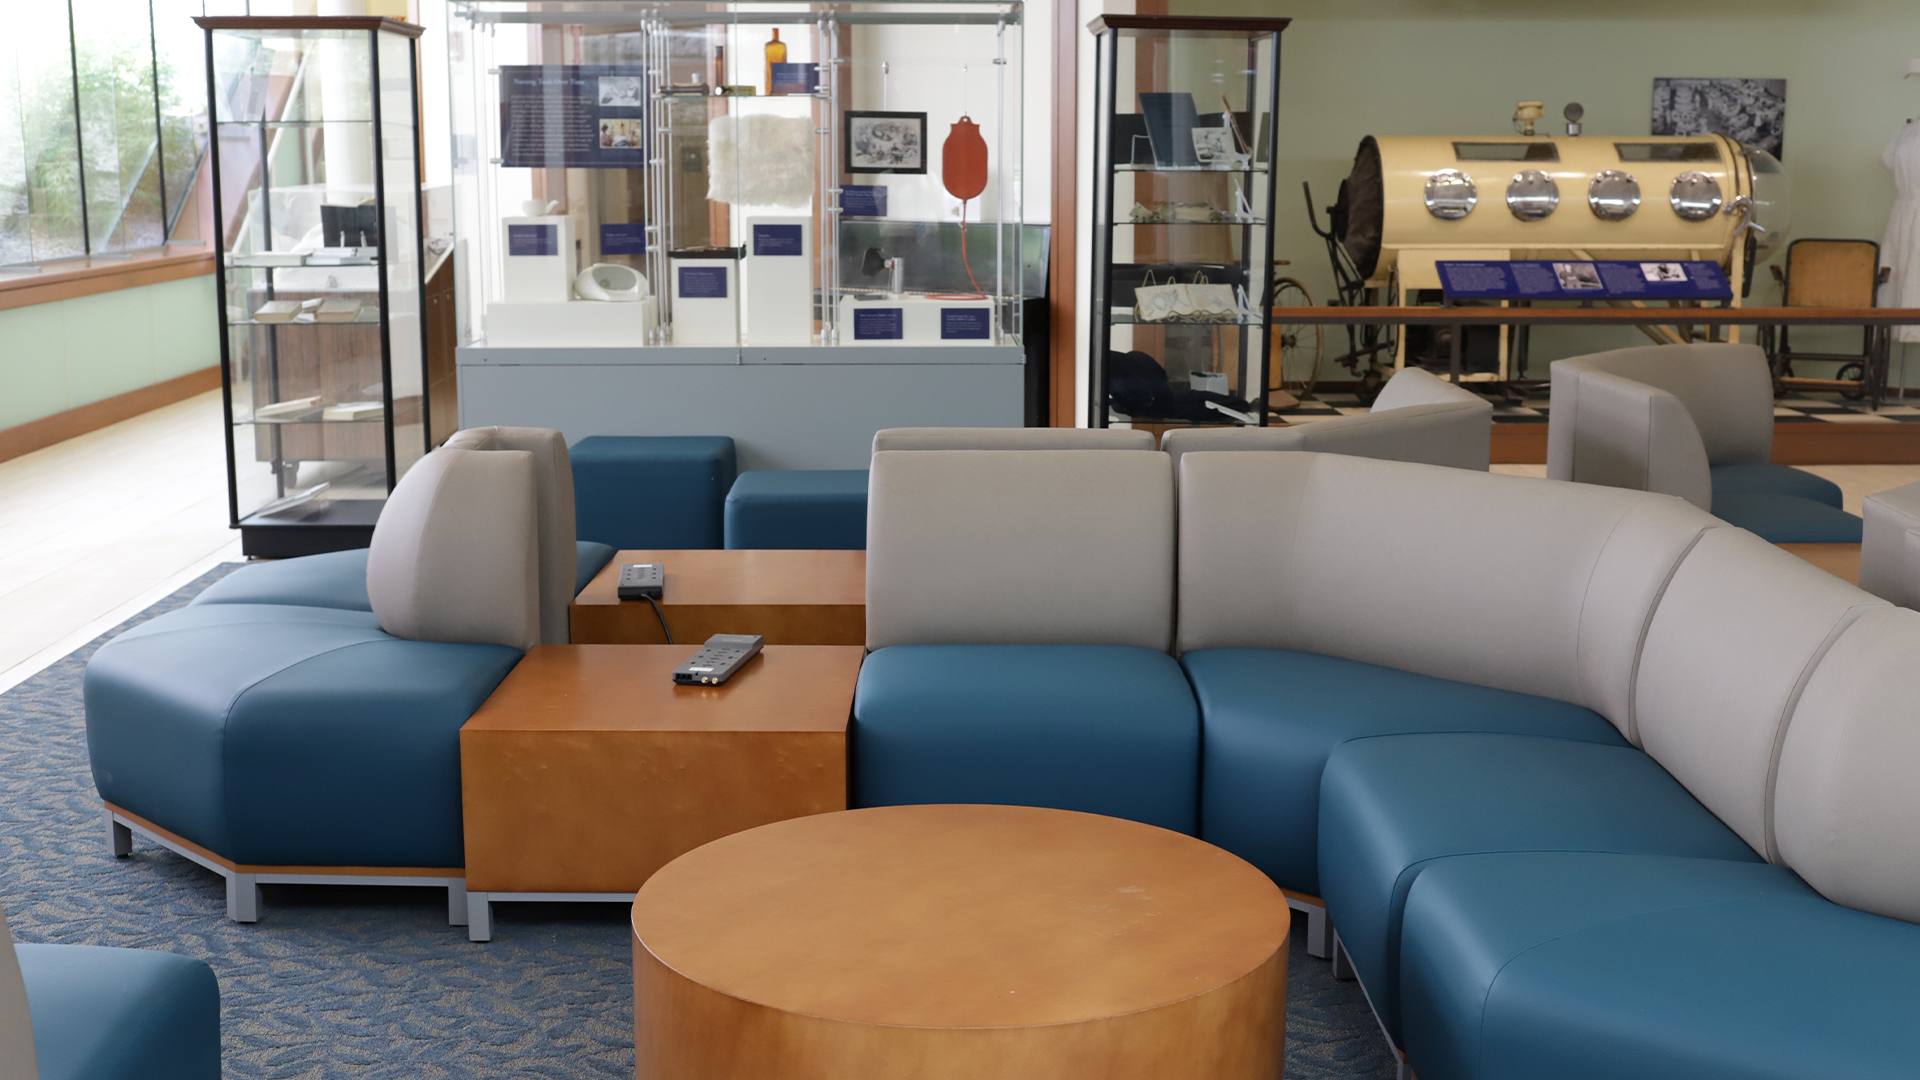 The lounge area inside the Widmer Wing of Storrs Hall